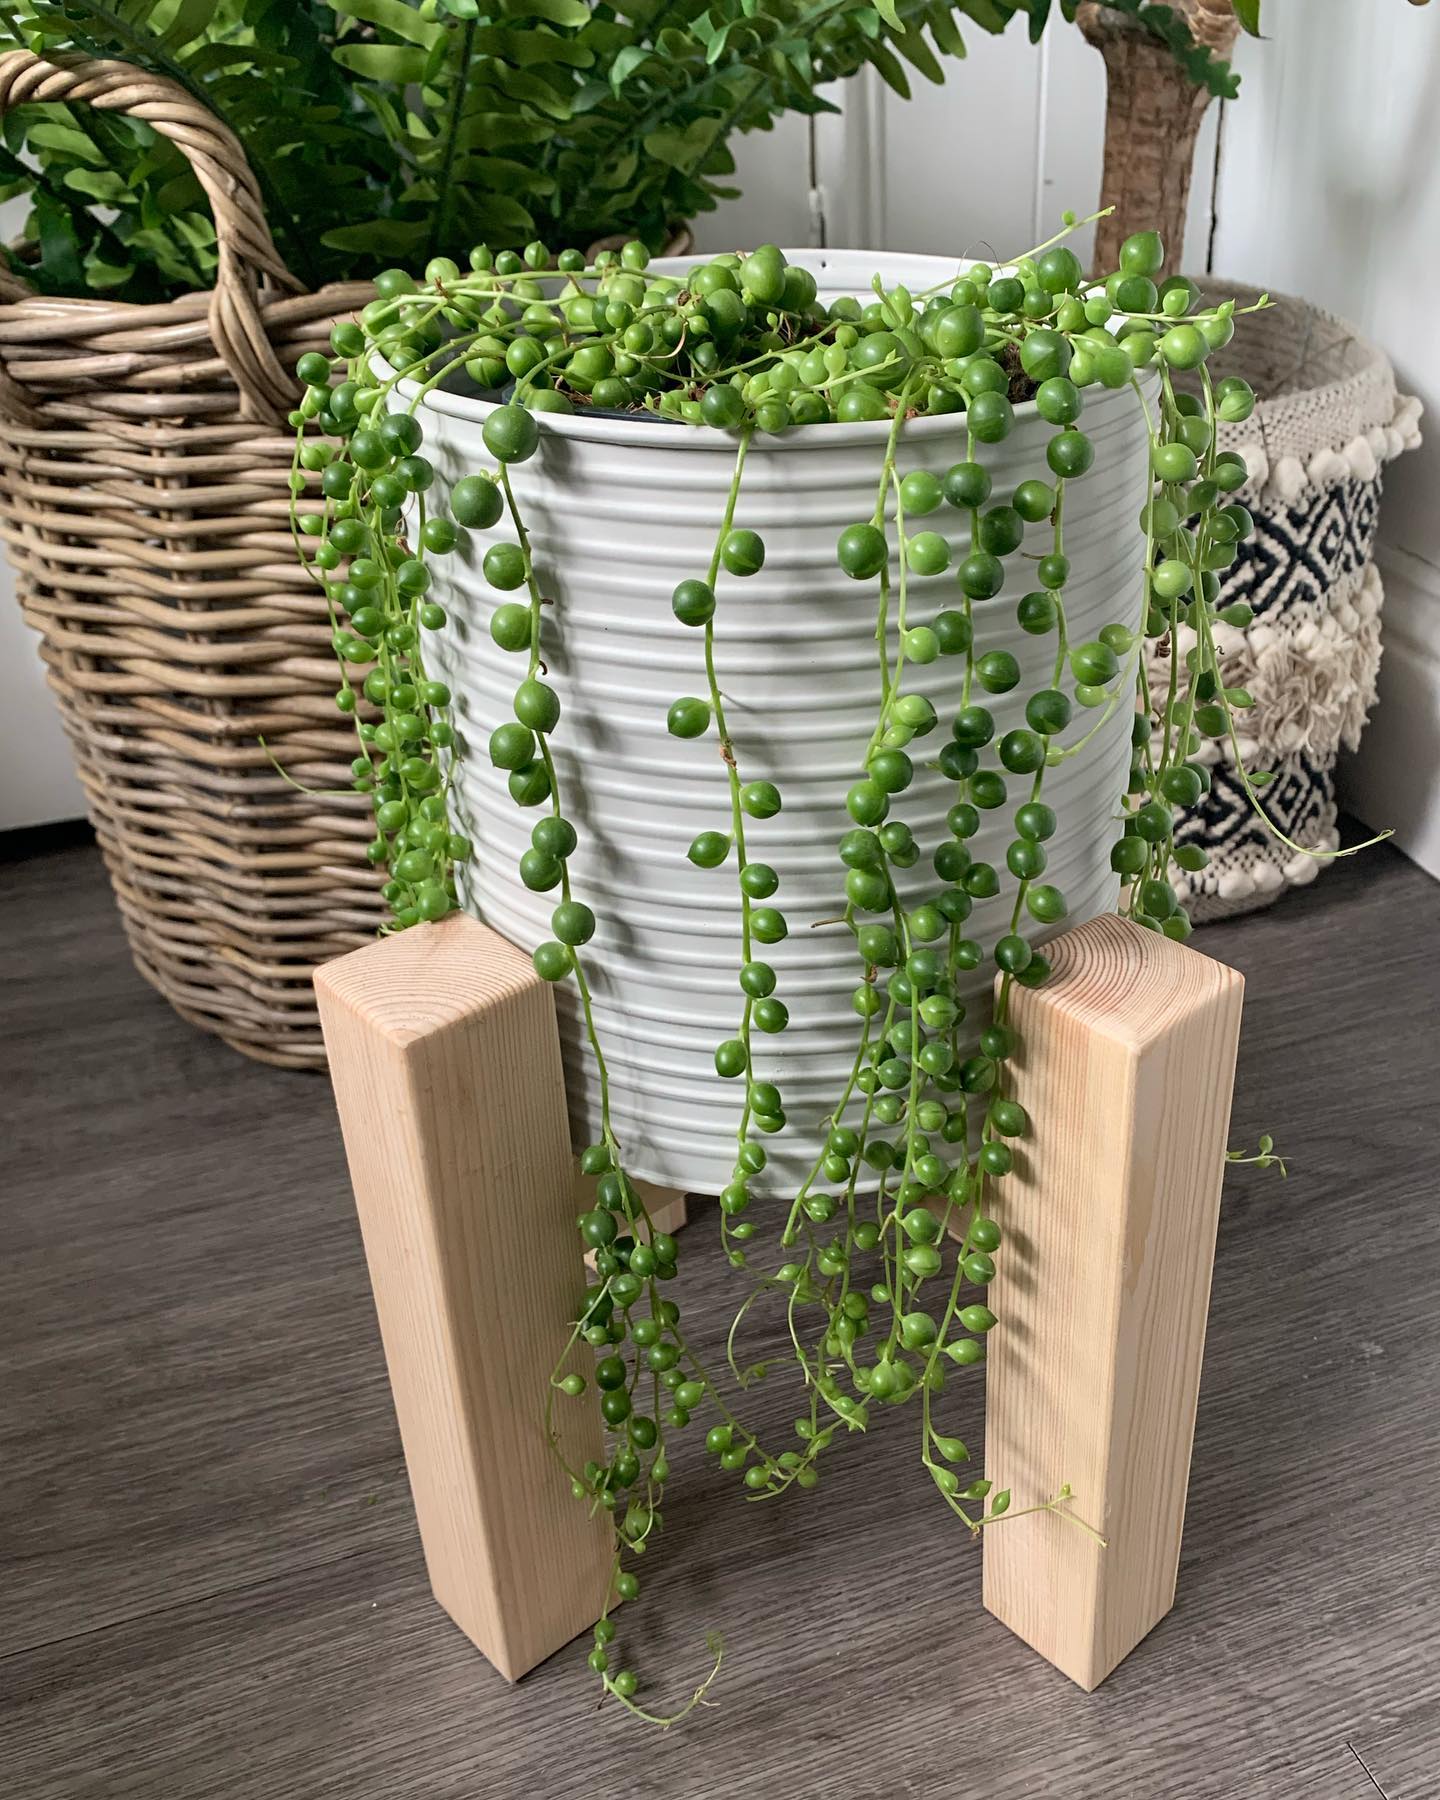 We made these simple plant stands early last year and finally we are sharing them with you all. They fit a pot with a maximum diameter of 18cm and can be used either way up. The stand comes in 2 pieces, easily assembled by slotting them together. We have left the wood untreated so that you can customise it to match any decor but we are happy to paint them for you if you have a particular request. Measurements are H 22cm26cm Total width18cm Internal diameter Soon to be available onlineFeel free to get in touch if you’re interested in the meantime. £15 including Postage**There is an extra charge for painting